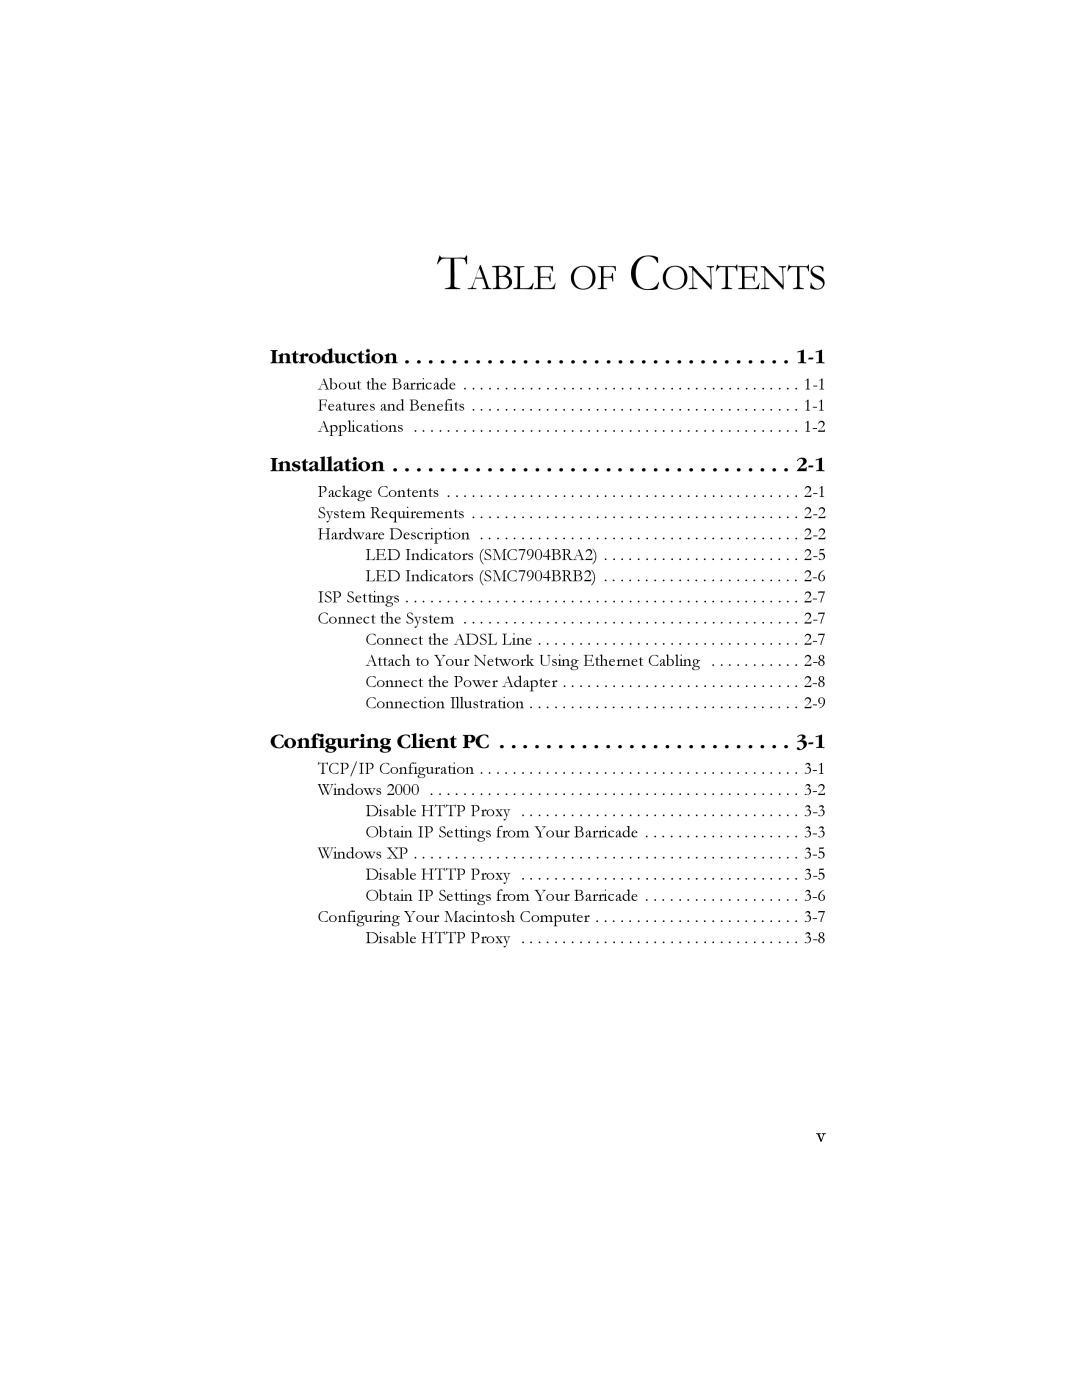 SMC Networks SMC7904BRB2 manual Table Of Contents, Introduction, Installation, Configuring Client PC 